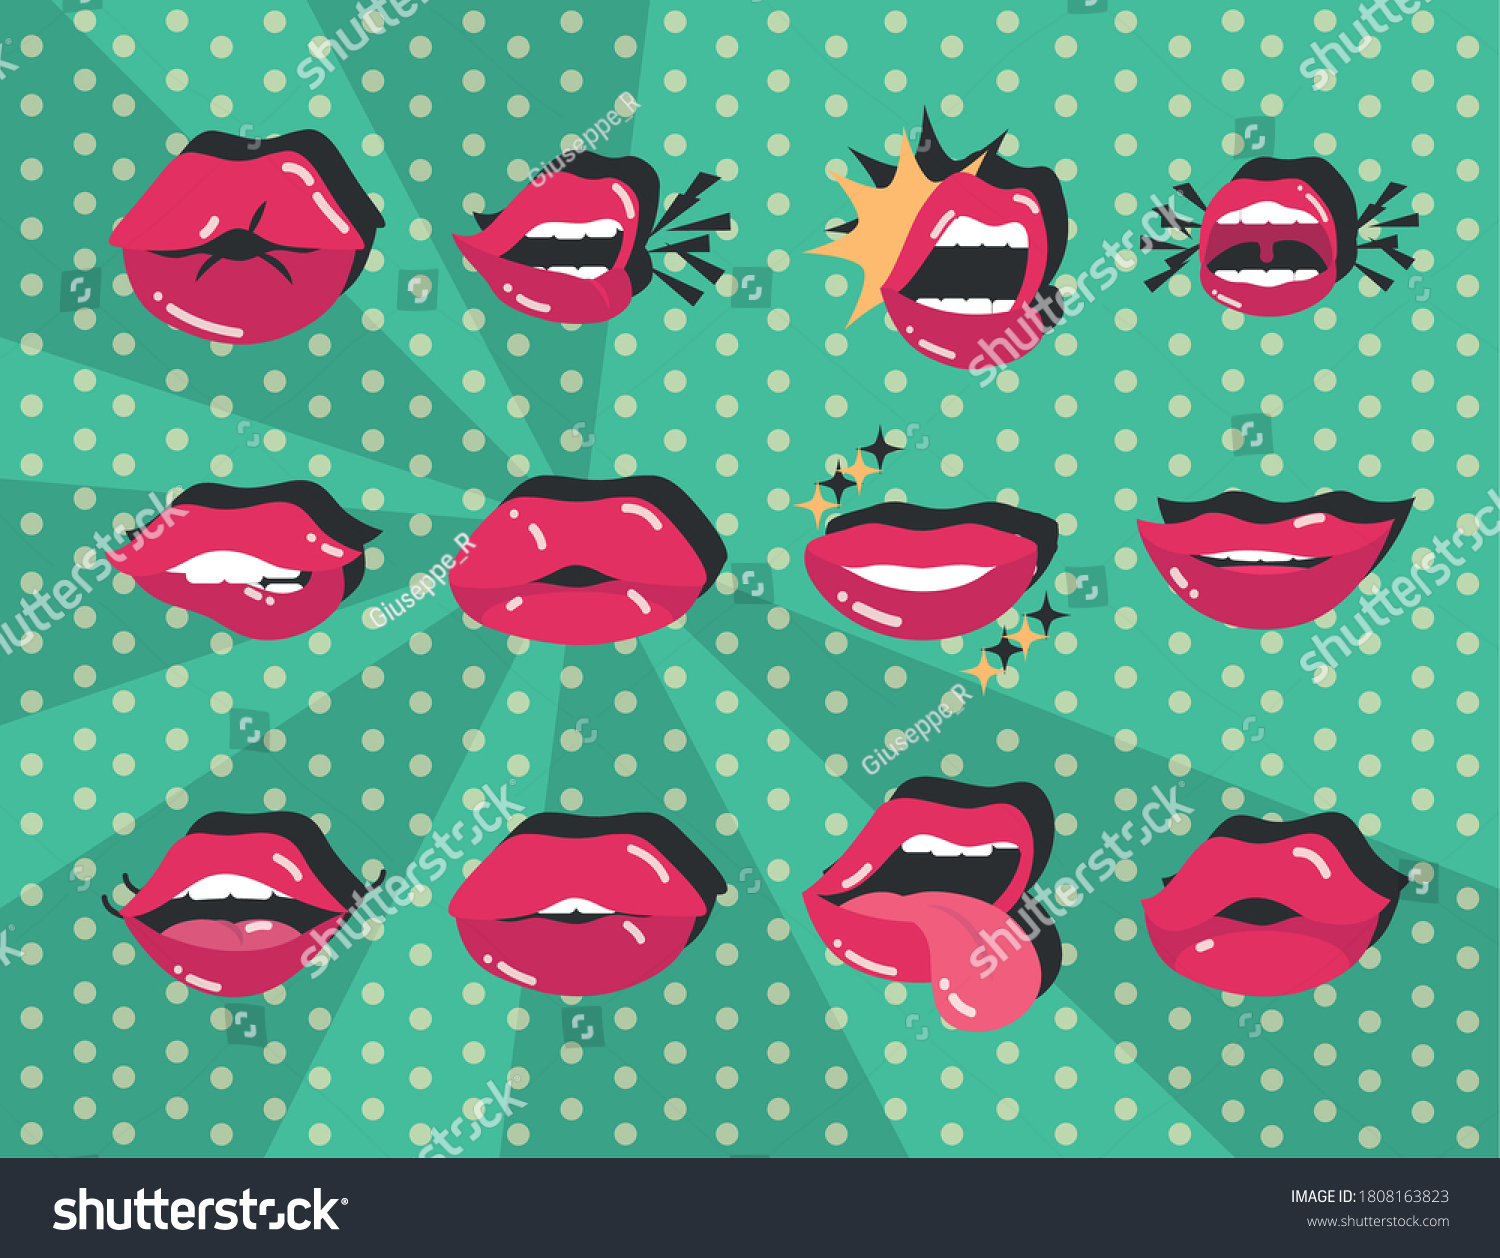 Pop Art Mouth Lips Sexy Female Stock Vector Royalty Free 1808163823 Shutterstock